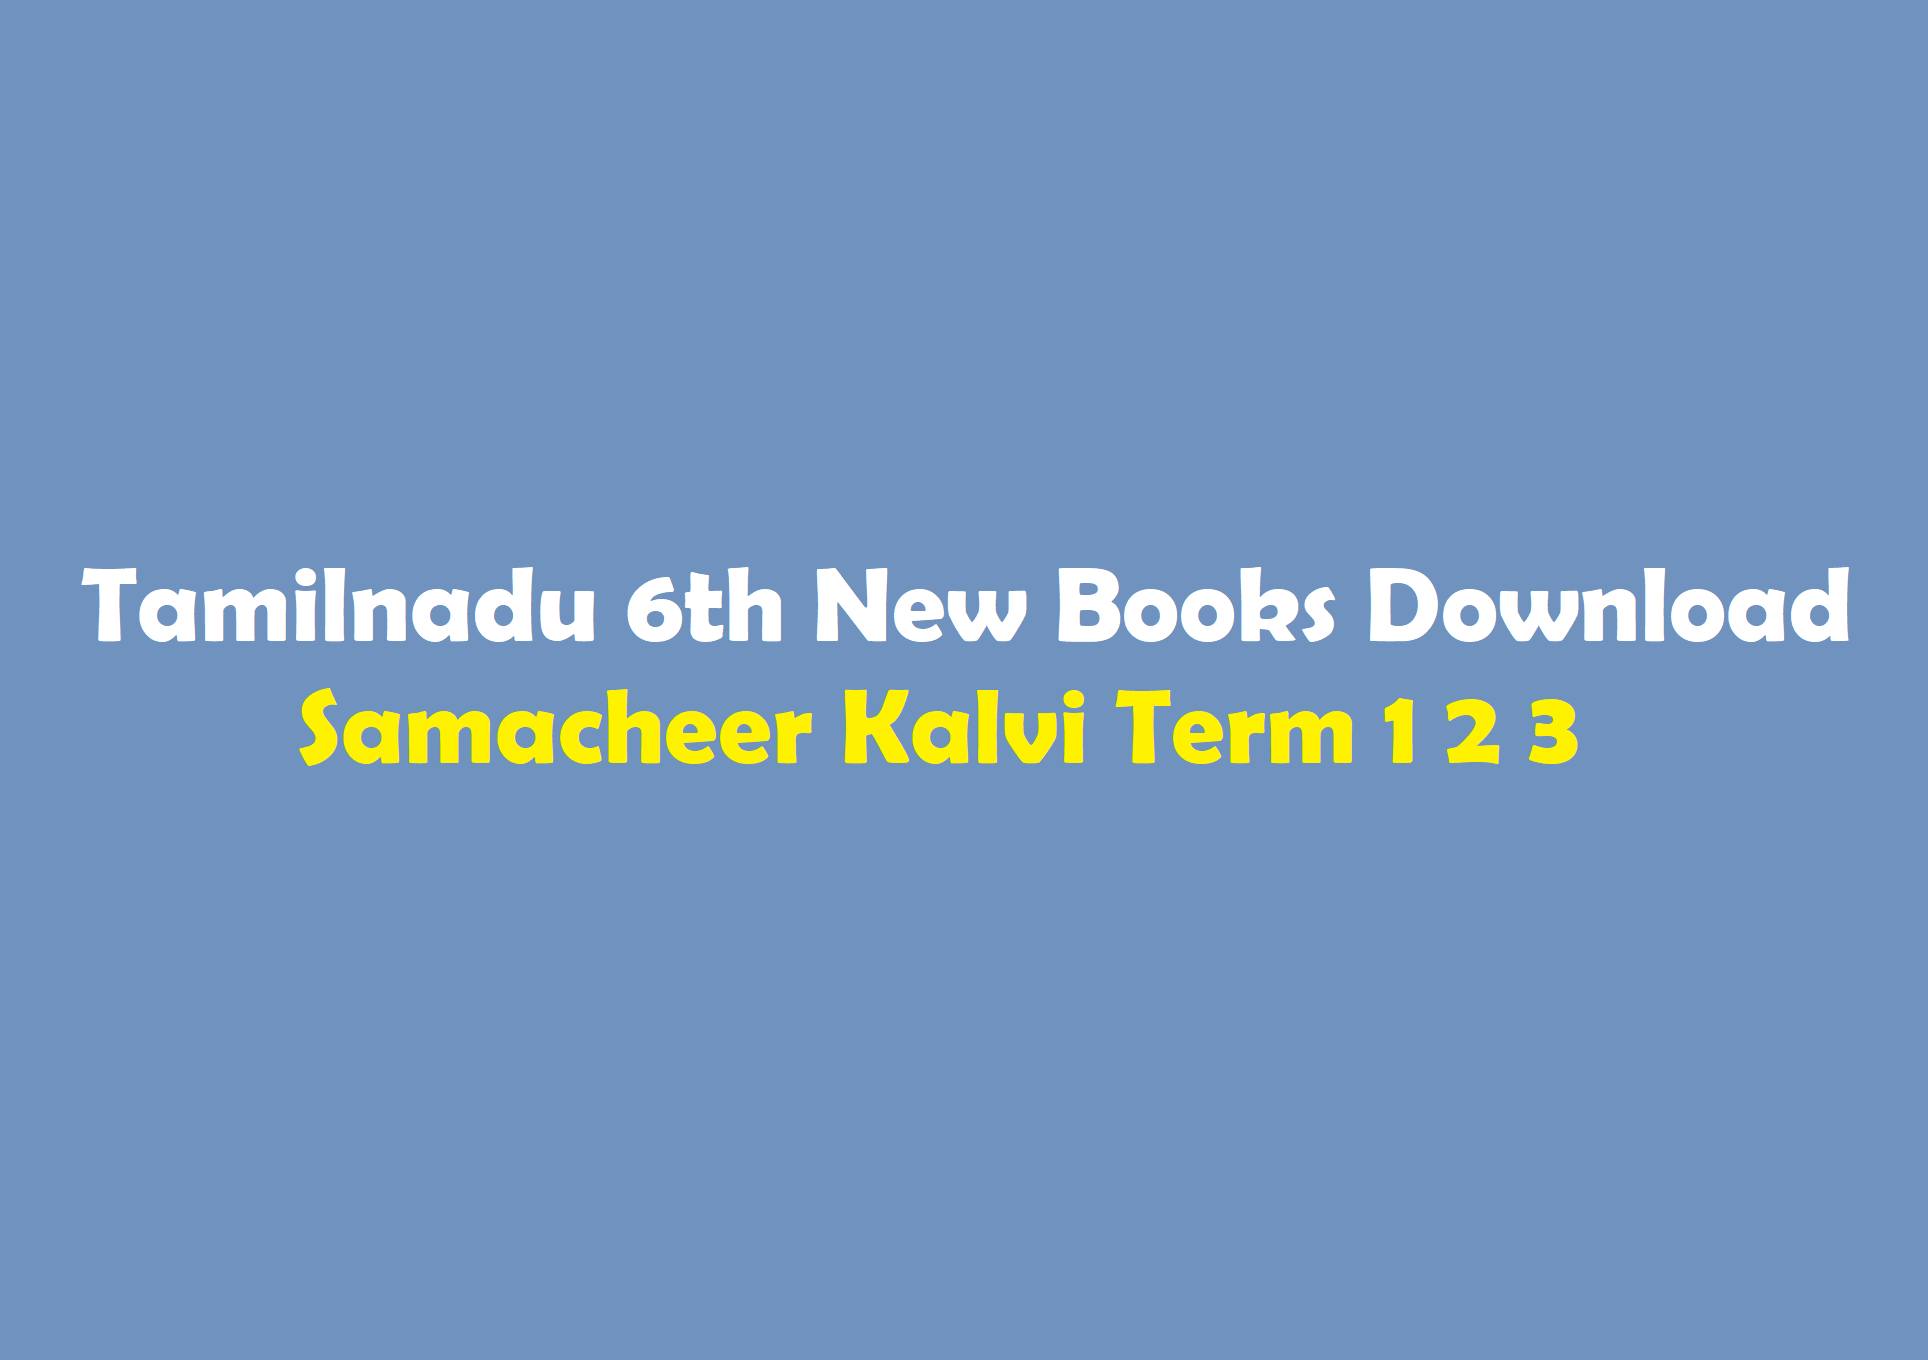 6th tamil new book pdf download 2019 blackmagic multiview 16 software download